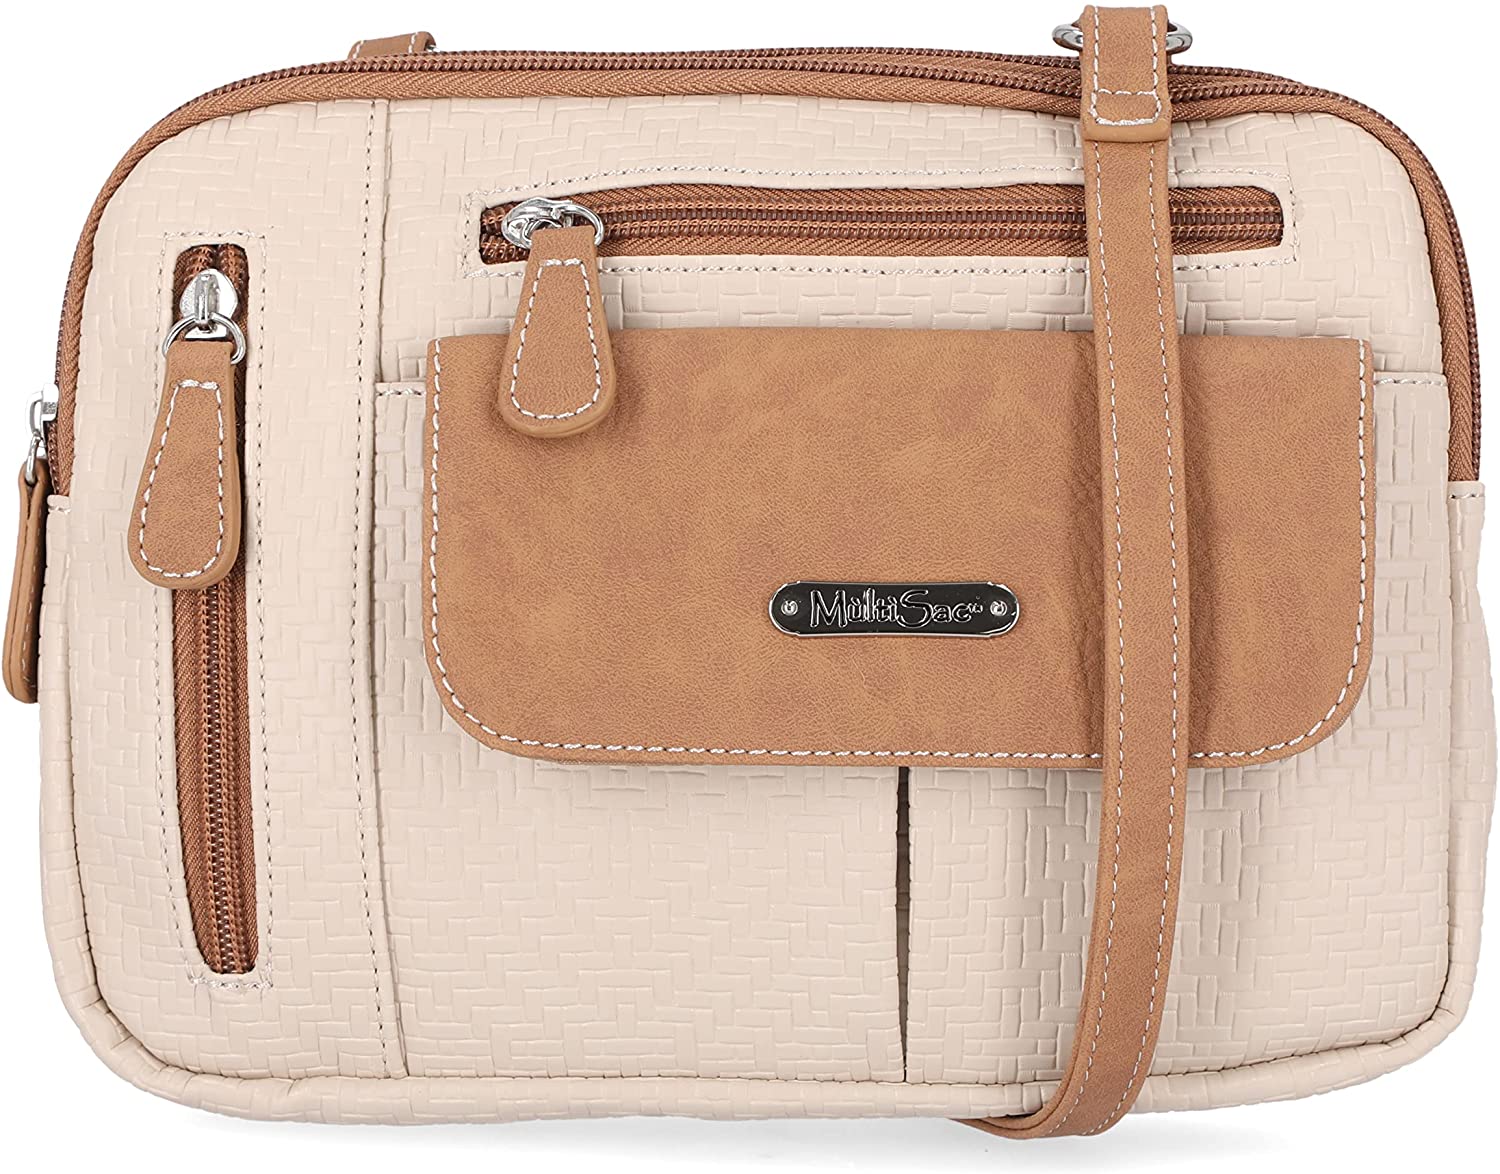 MultiSac Teeny Blooms & Nude Major Backpack, Best Price and Reviews